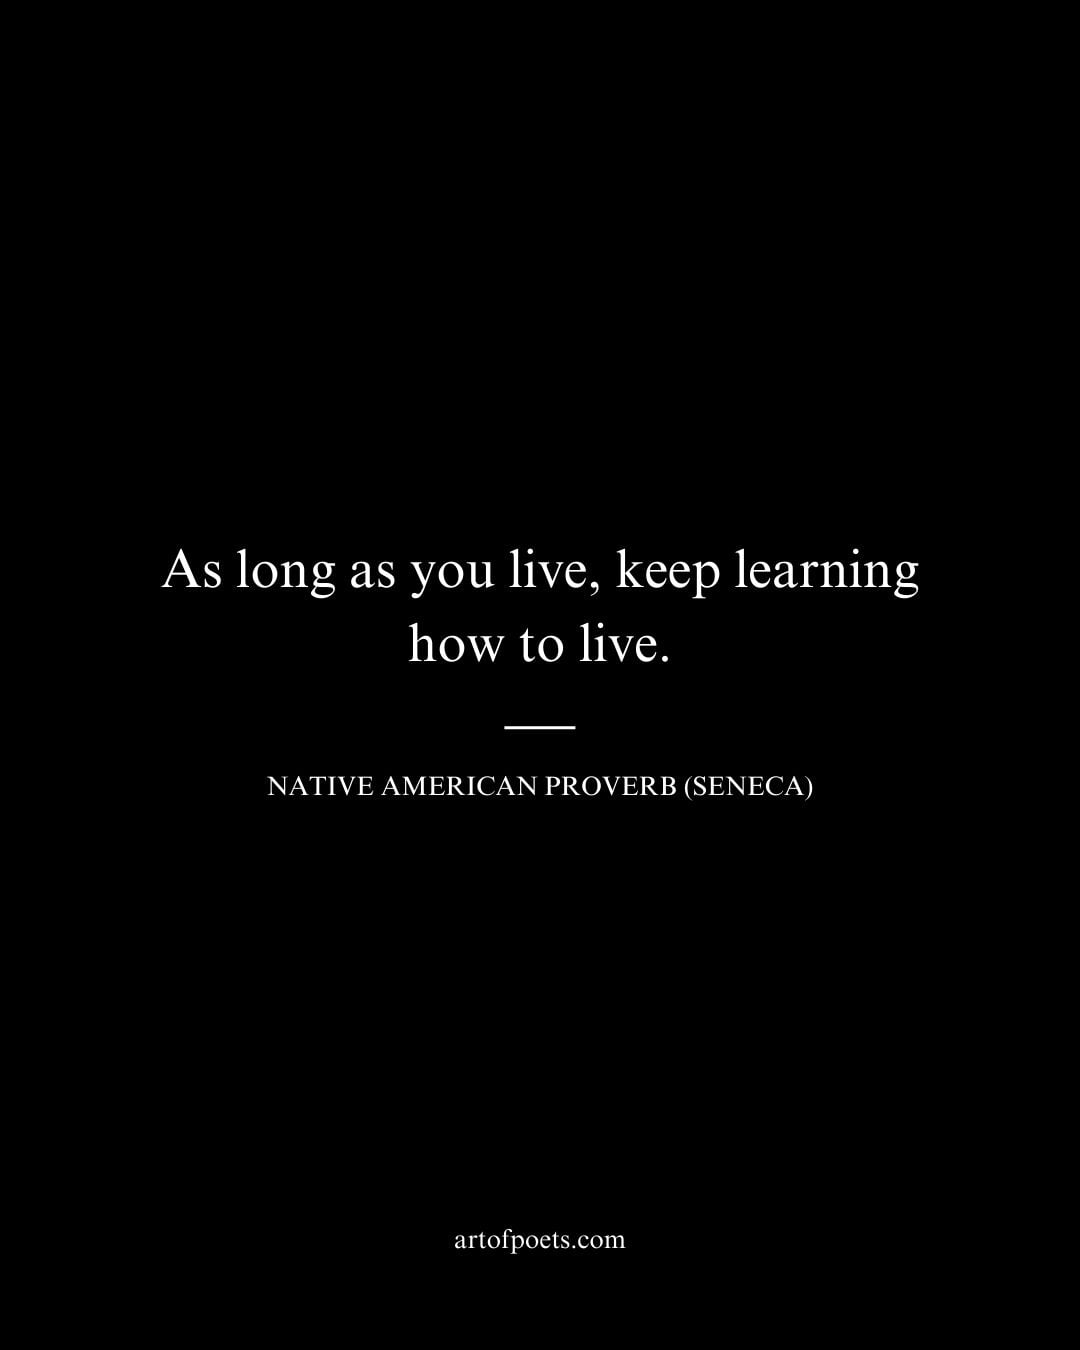 As long as you live keep learning how to live 1